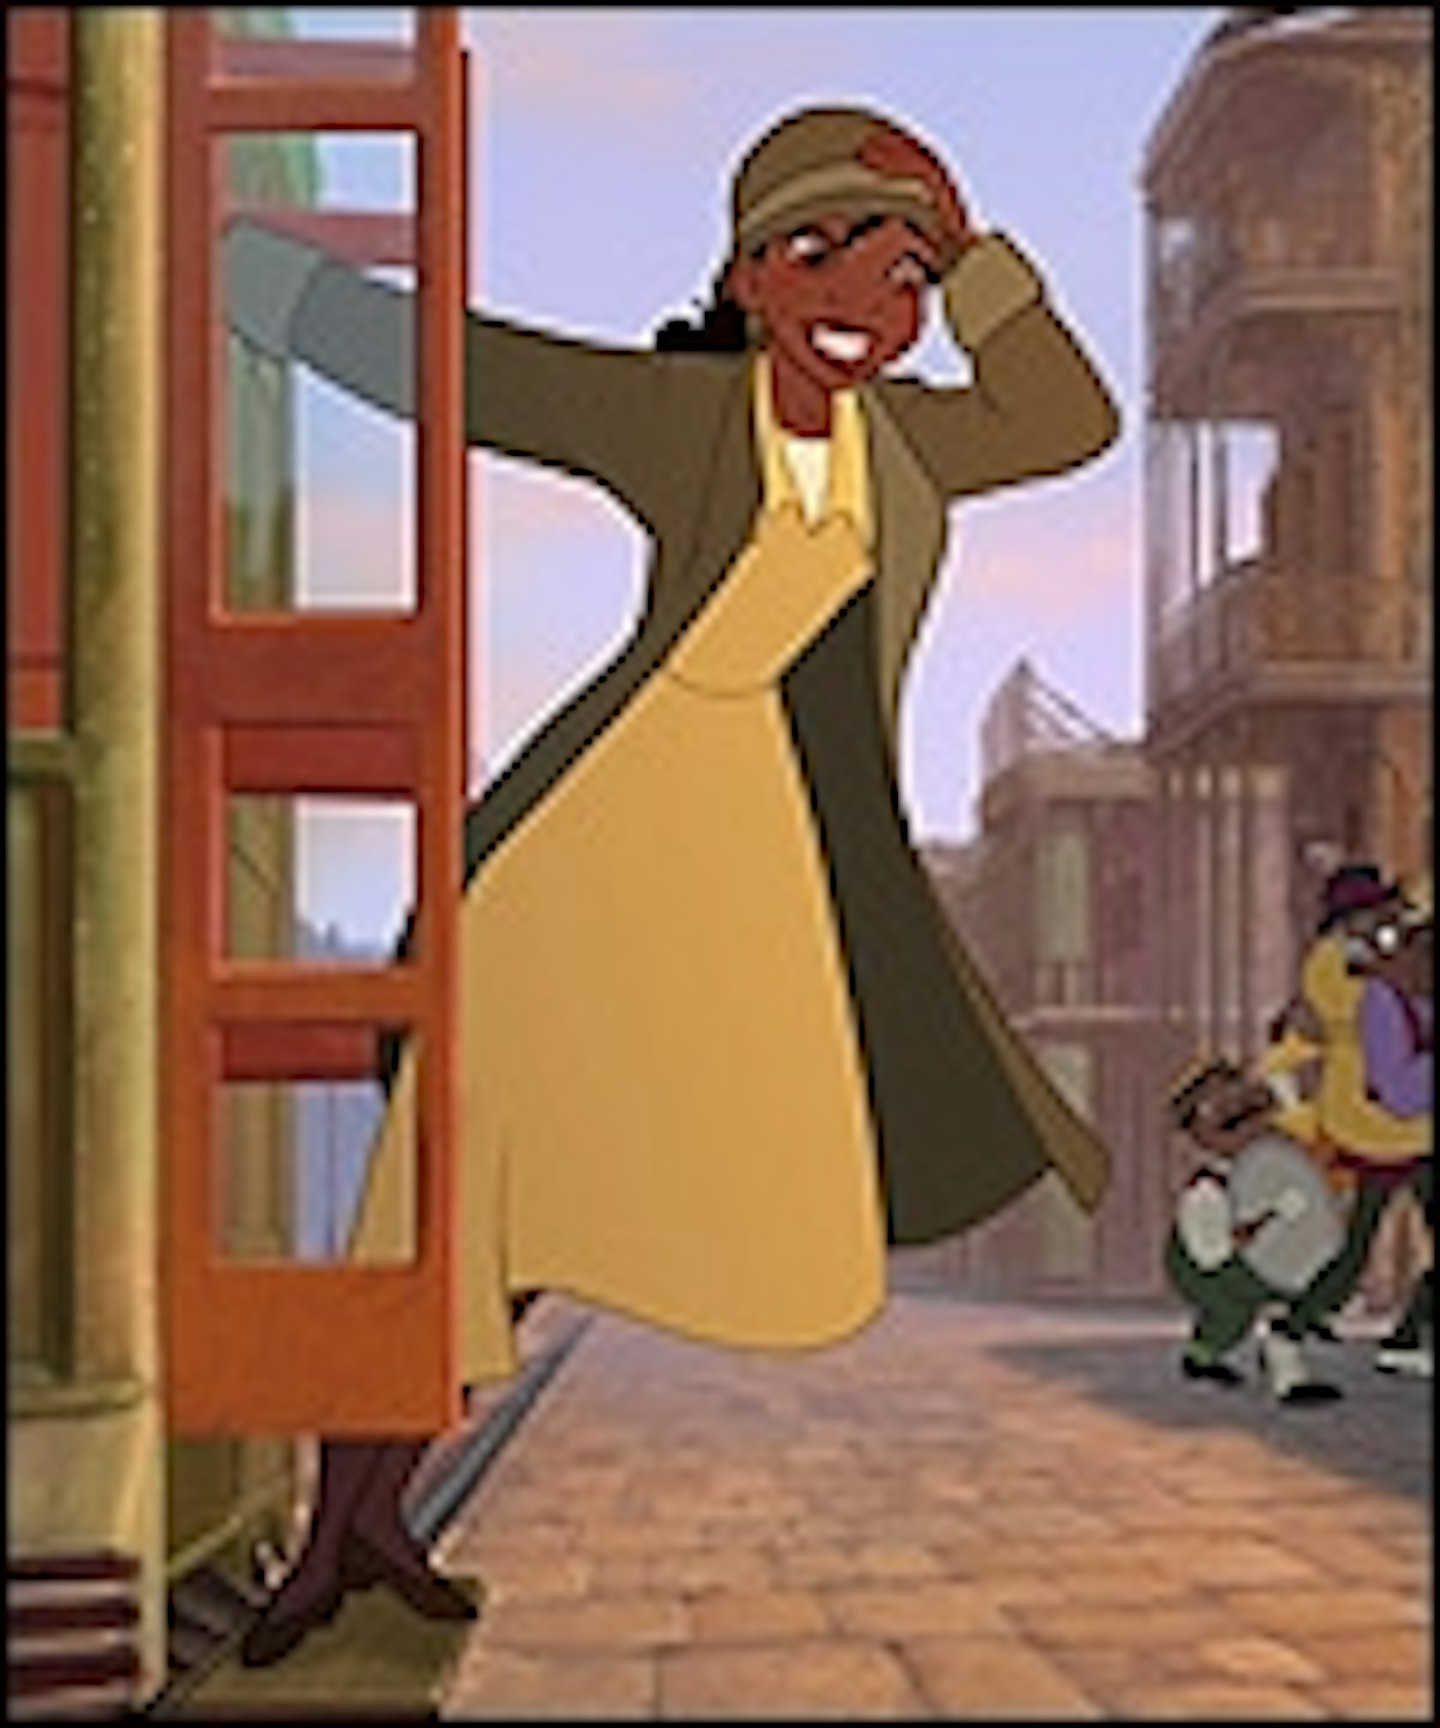 New Pics From The Princess & The Frog